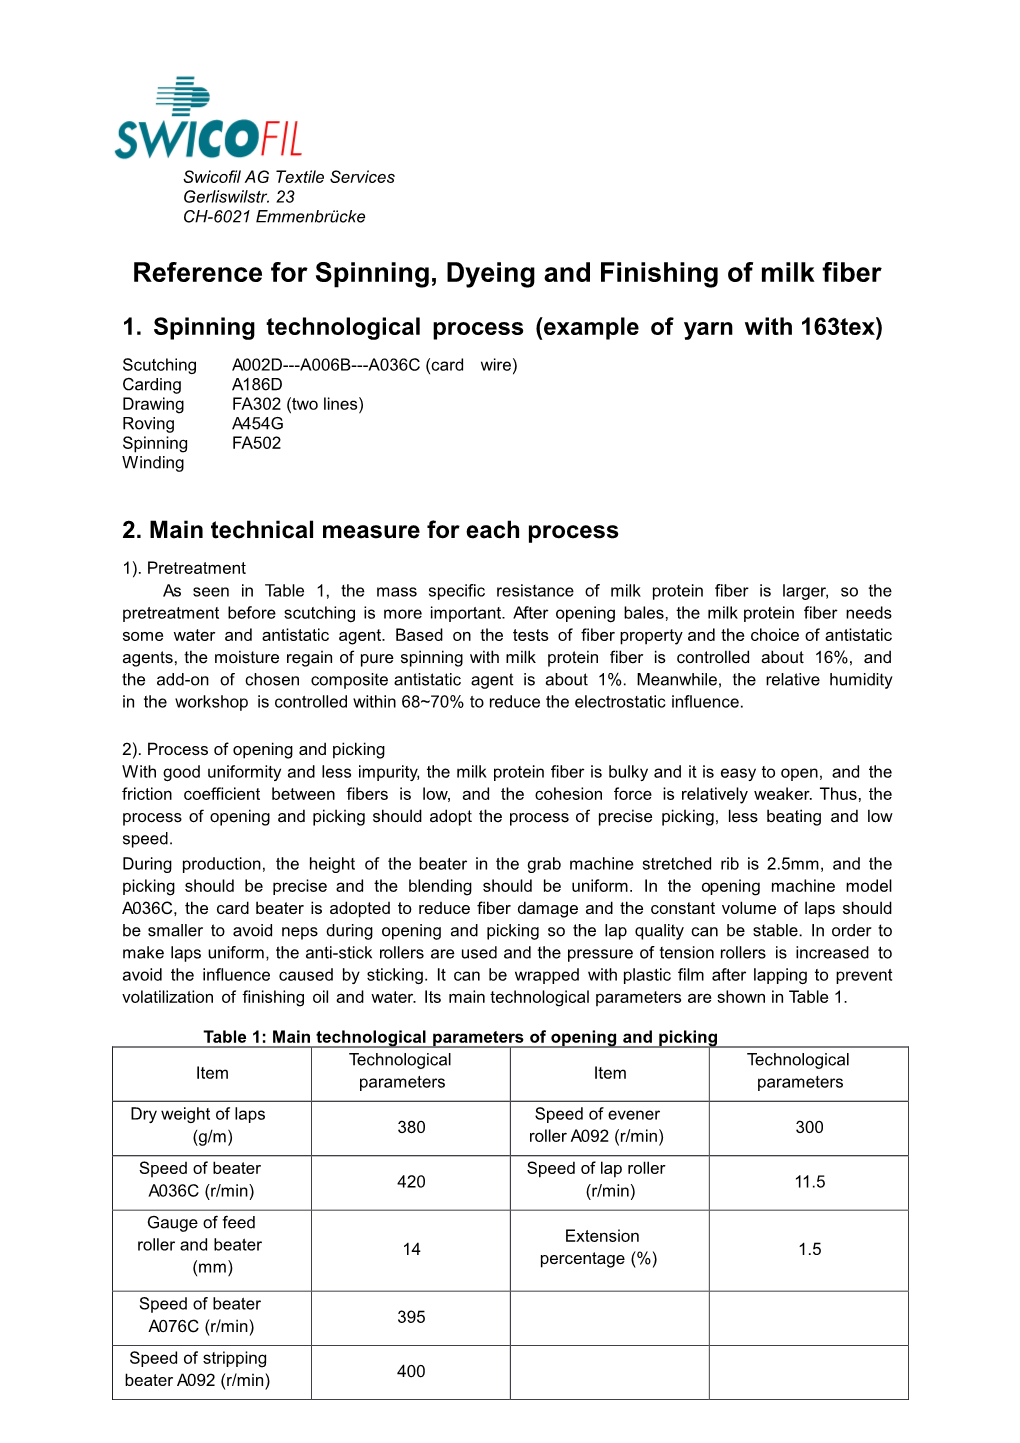 Reference for Spinning, Dyeing and Finishing of Milk Fiber